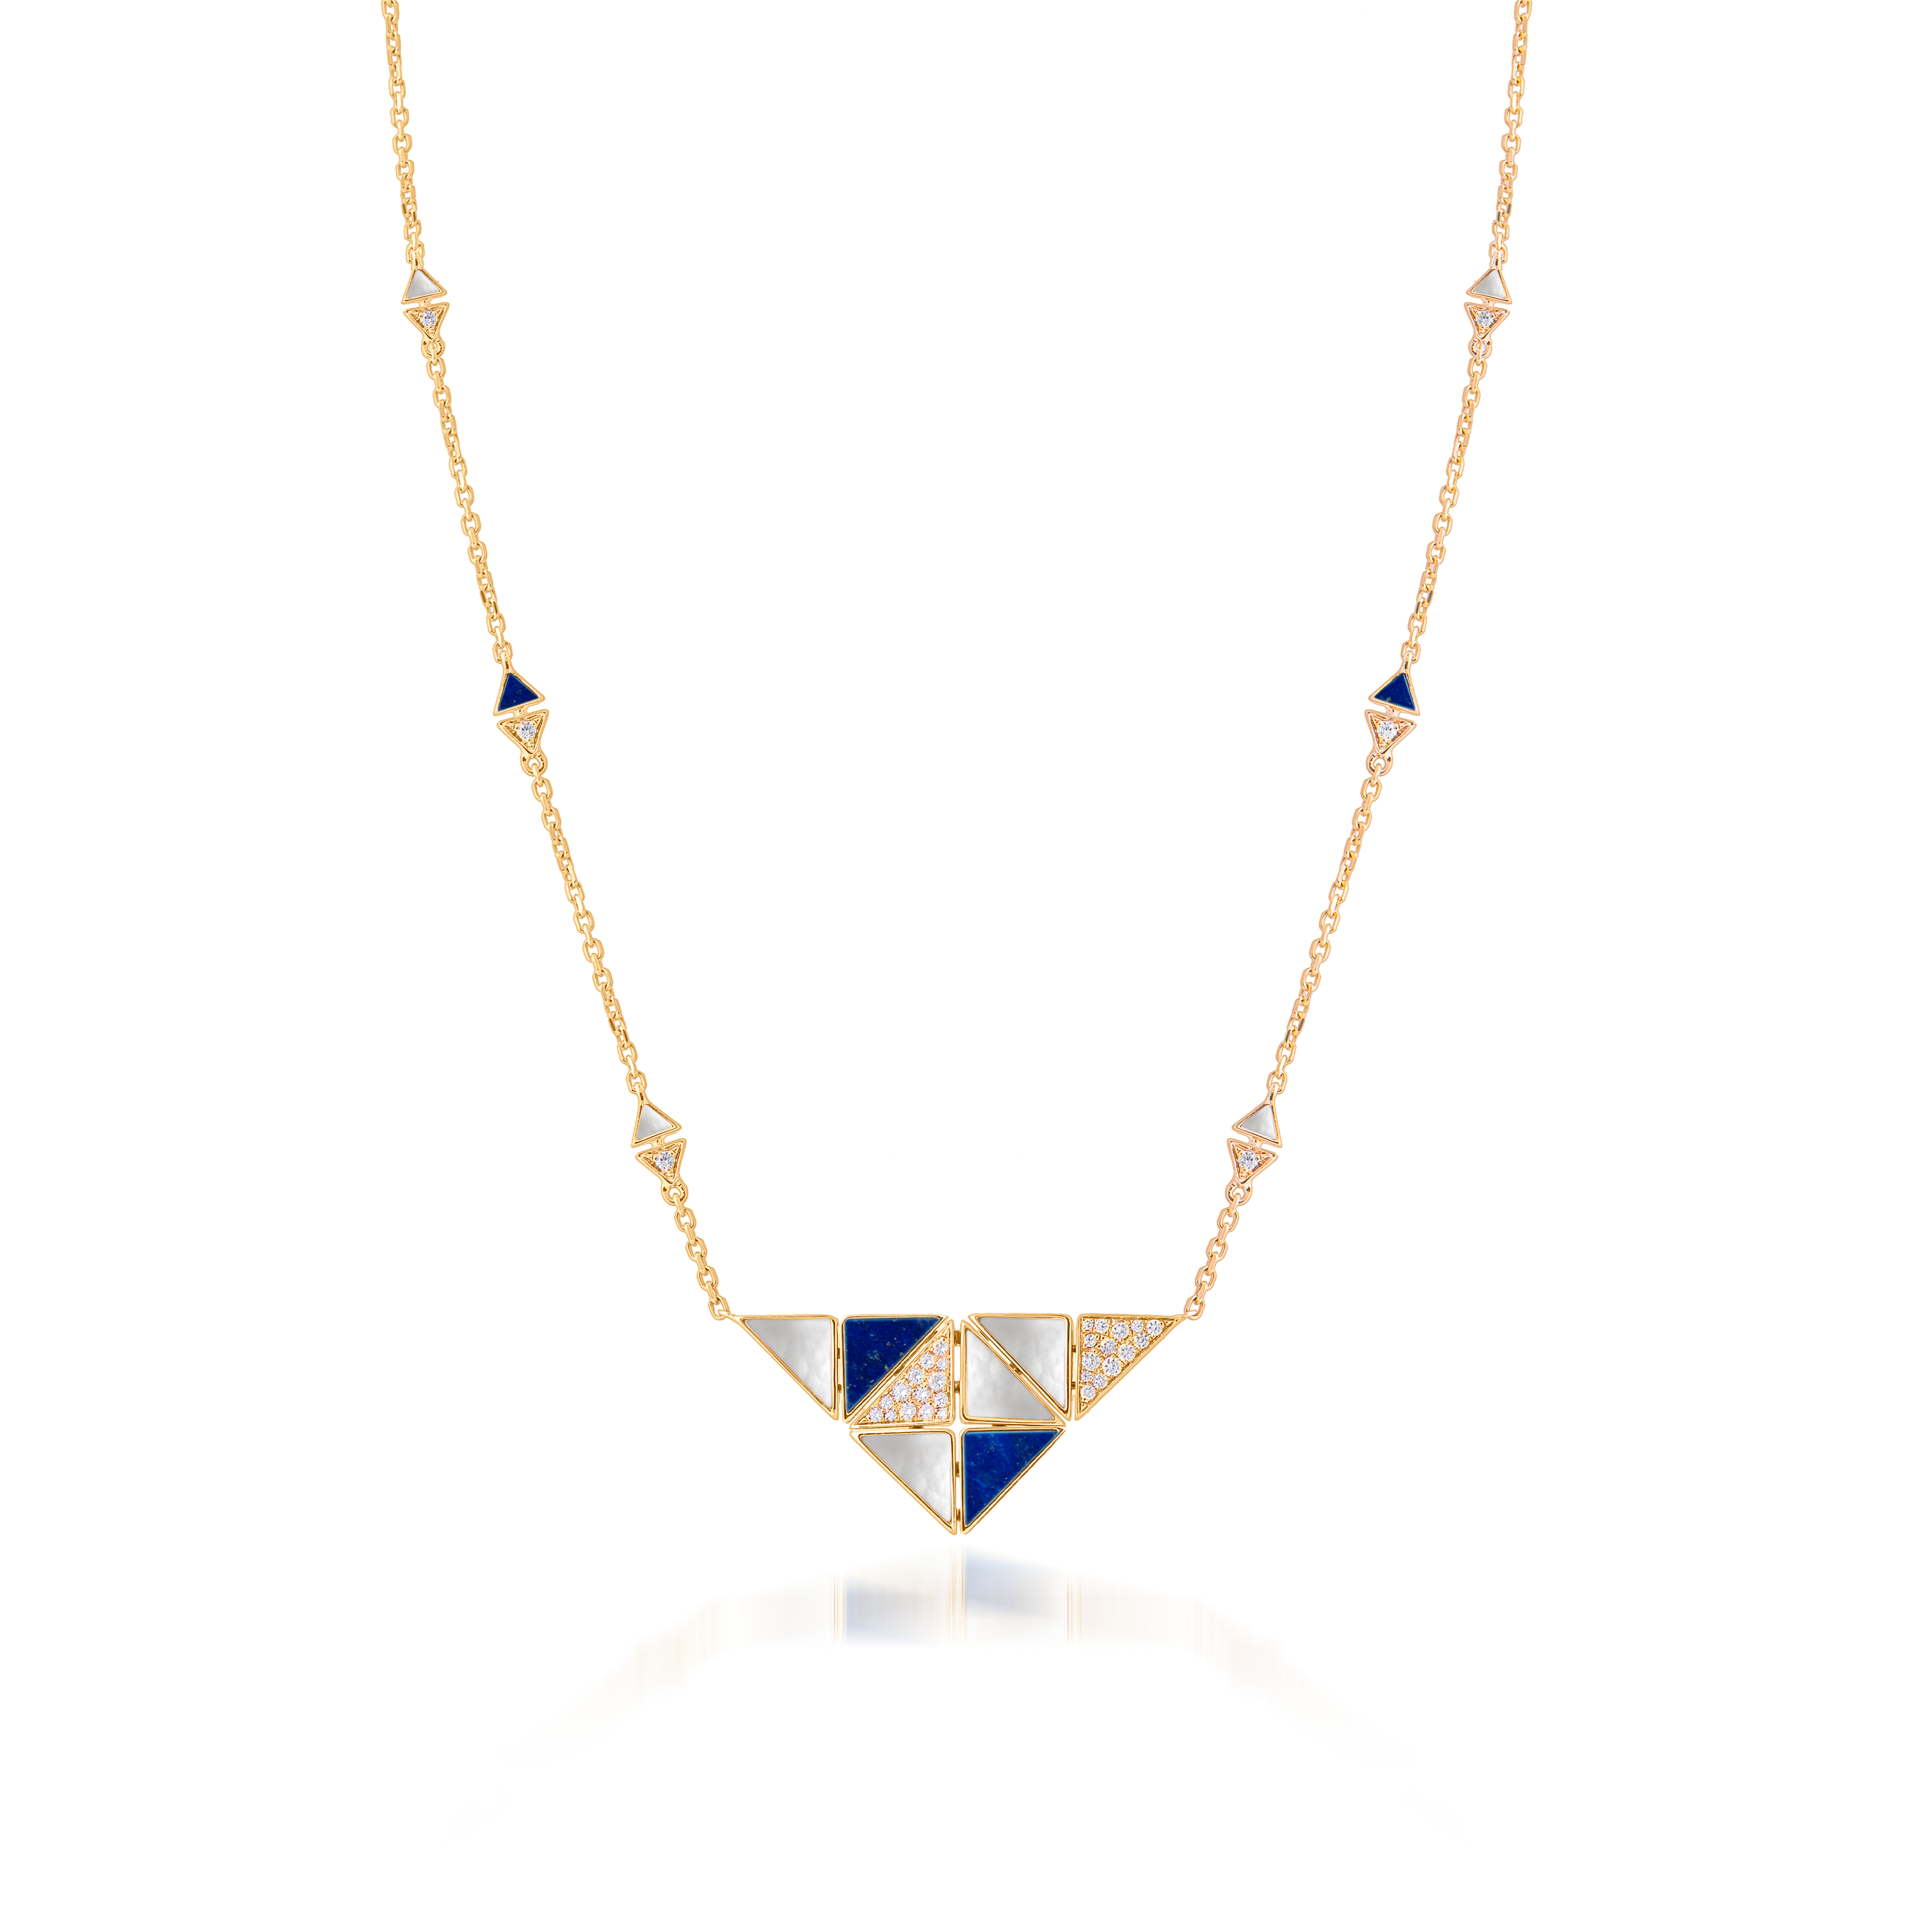 Deco Quadratic Necklace with Lapis Lazuli, White Mother of Pearl and Diamonds  In 18K Yellow Gold